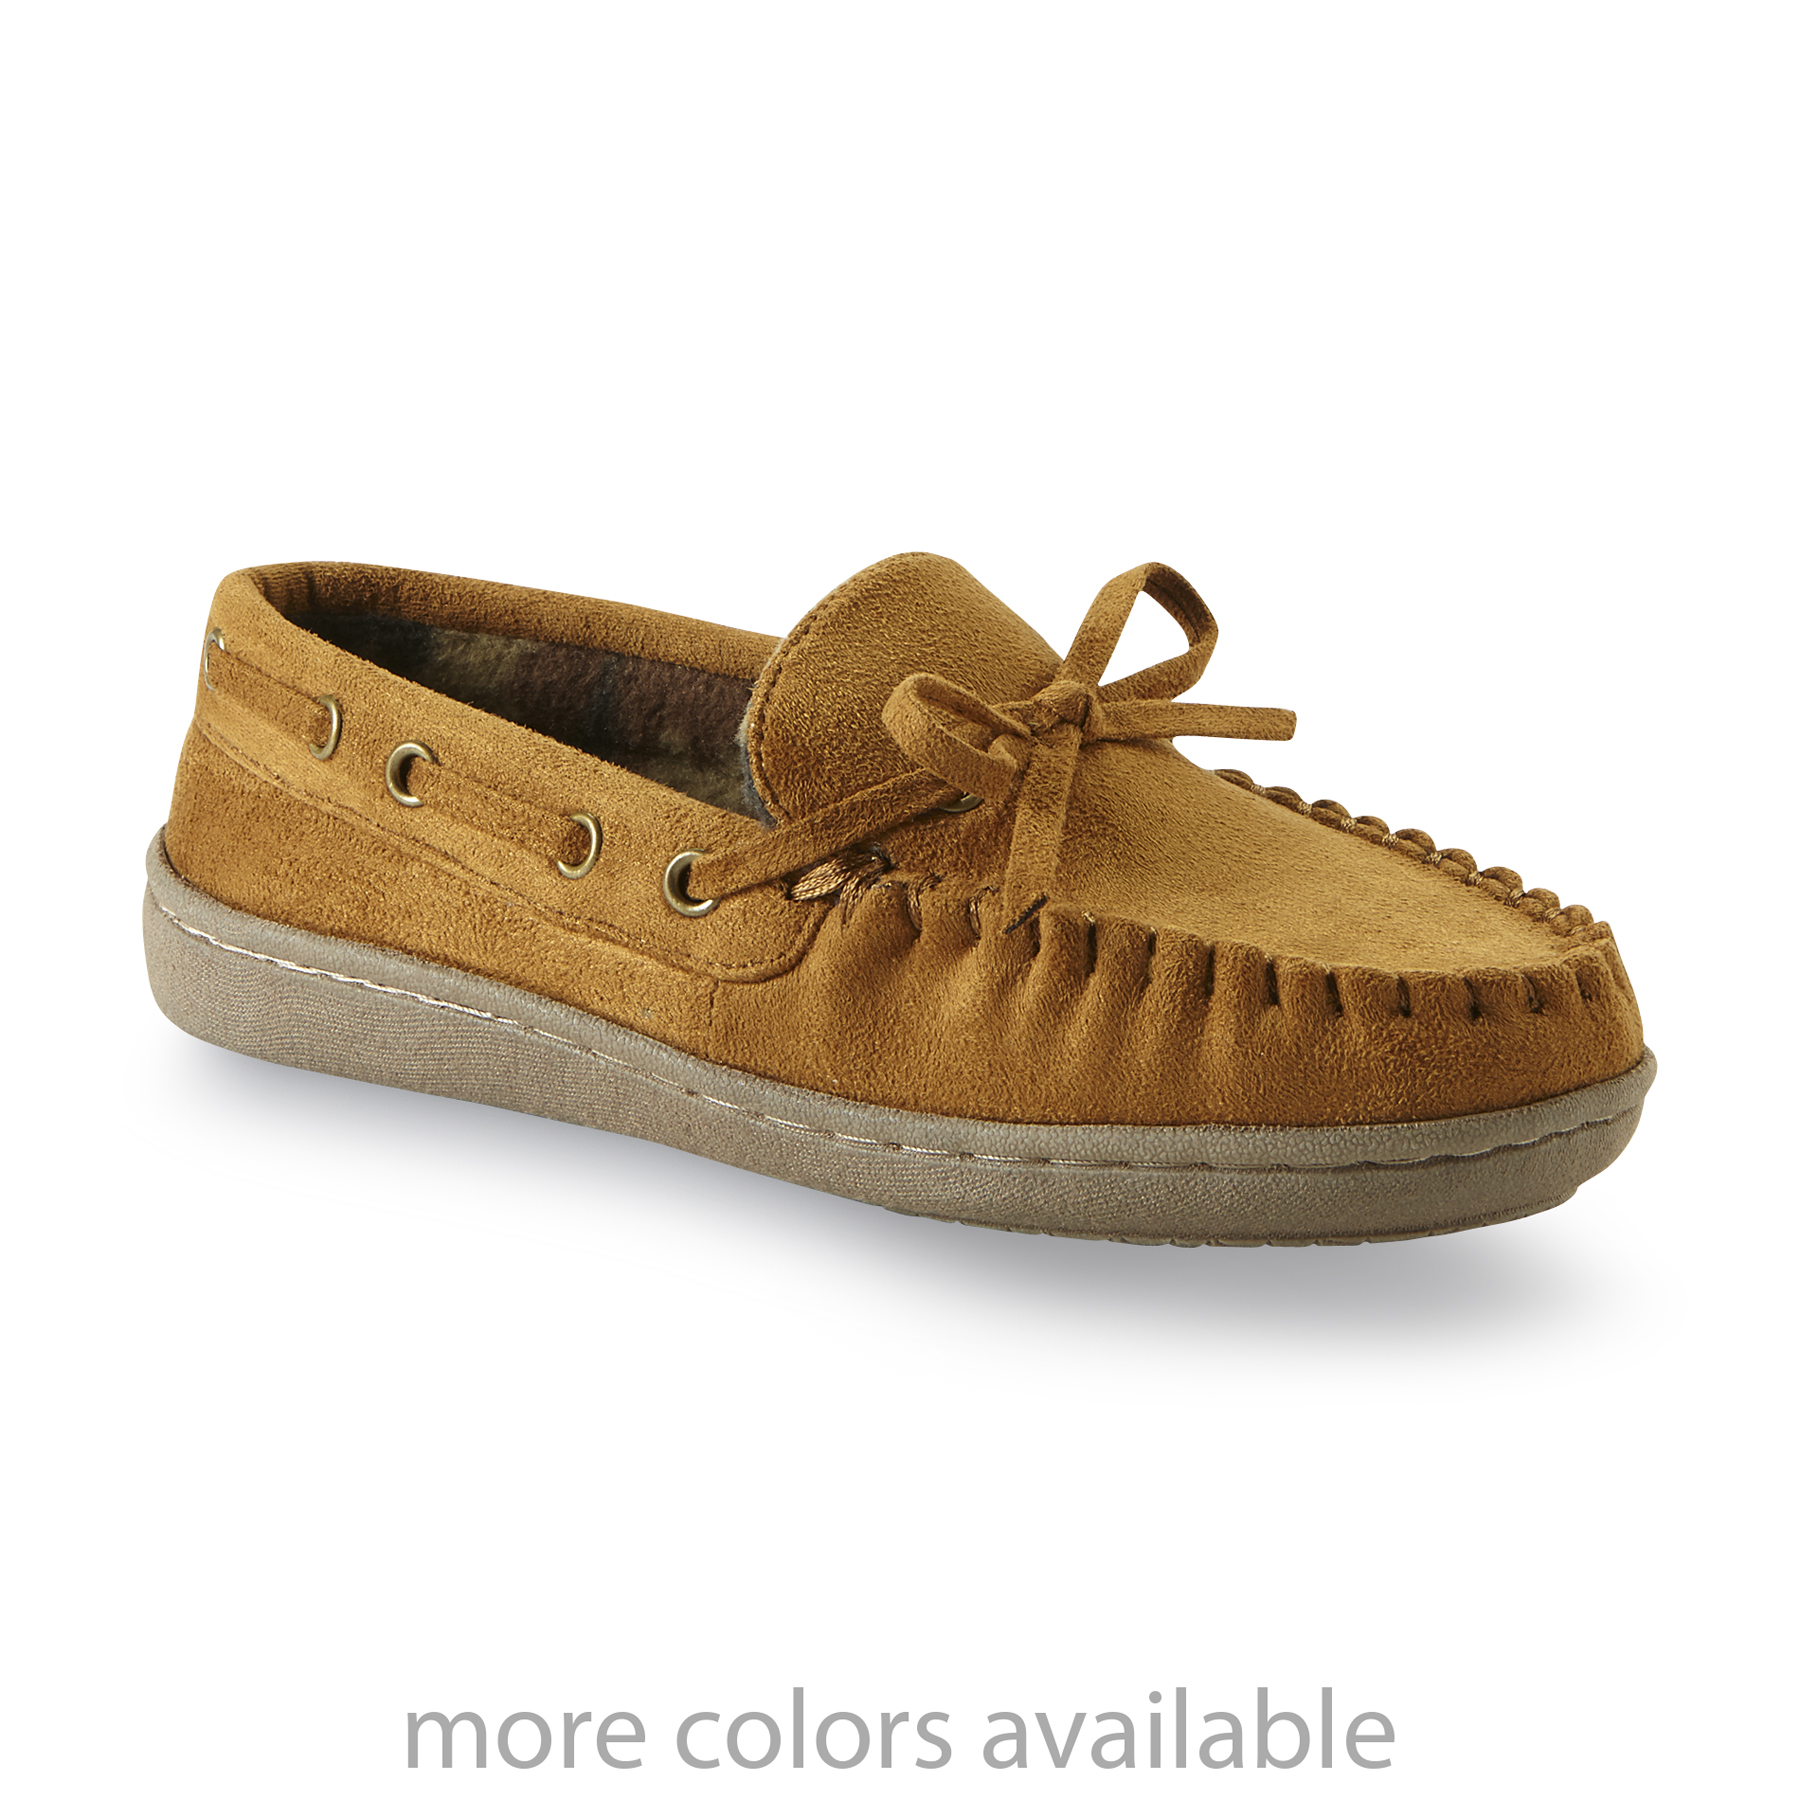 Canyon River Blues Toddler/Youth Boy's Lowell Moccasin Slipper - Tan